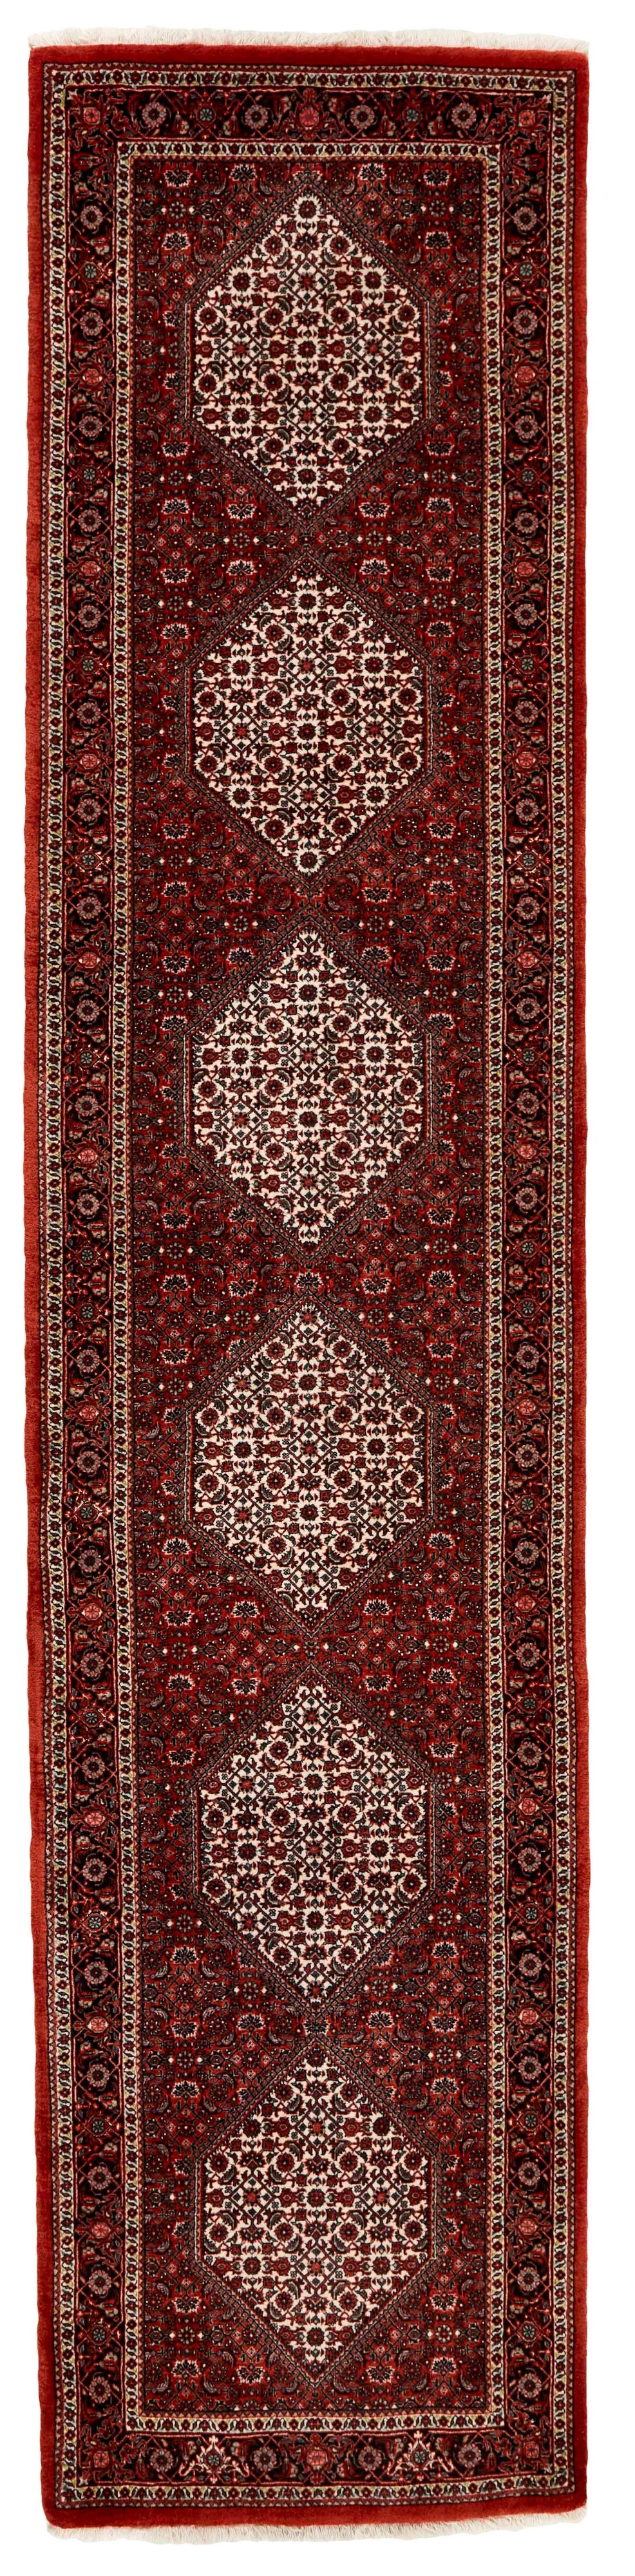 red and cream persian runner with traditional floral design